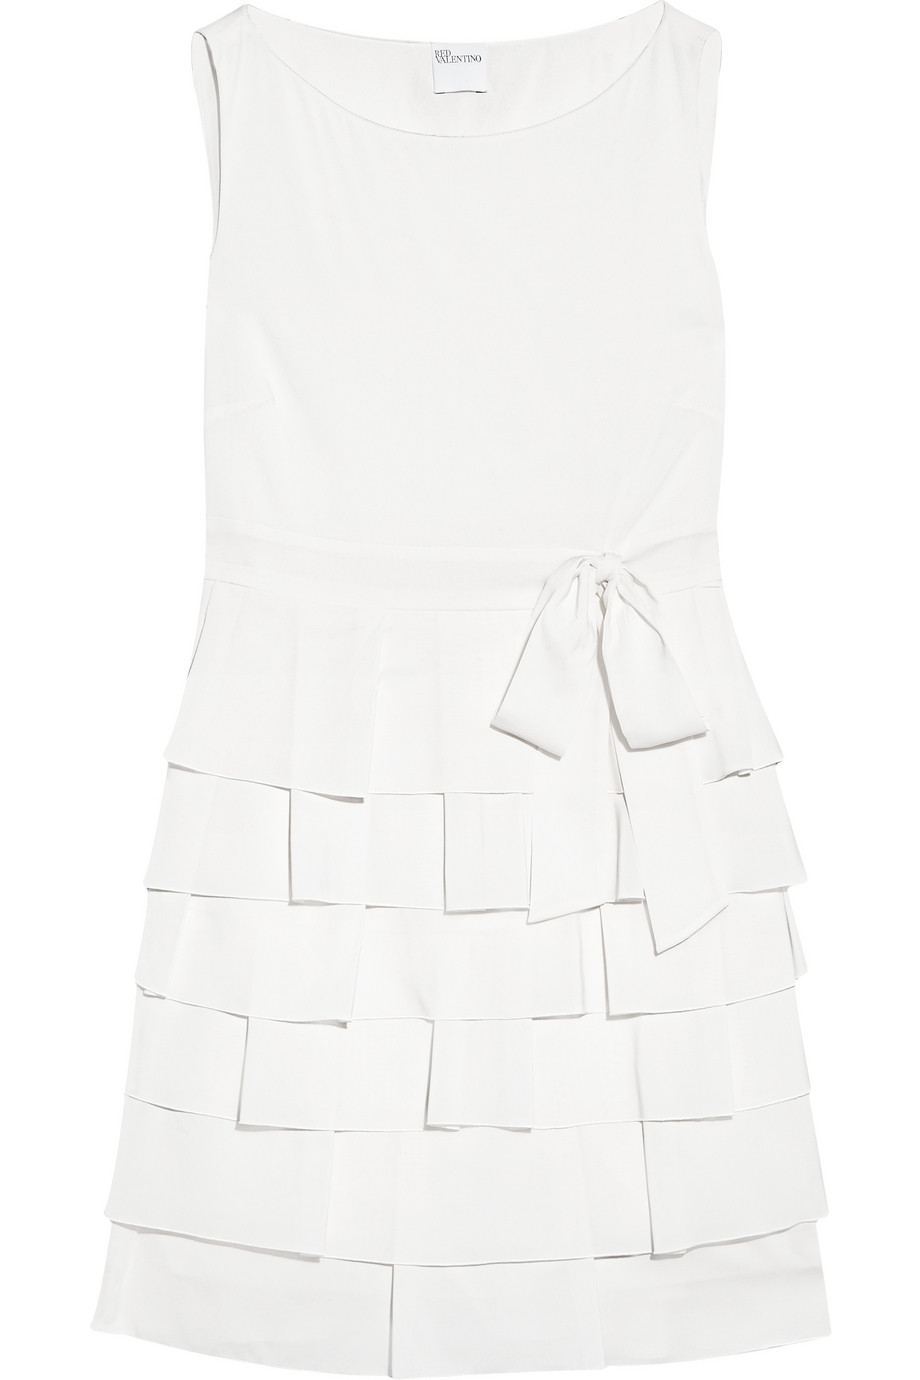 Red valentino Ruffled Crepe Dress in White | Lyst